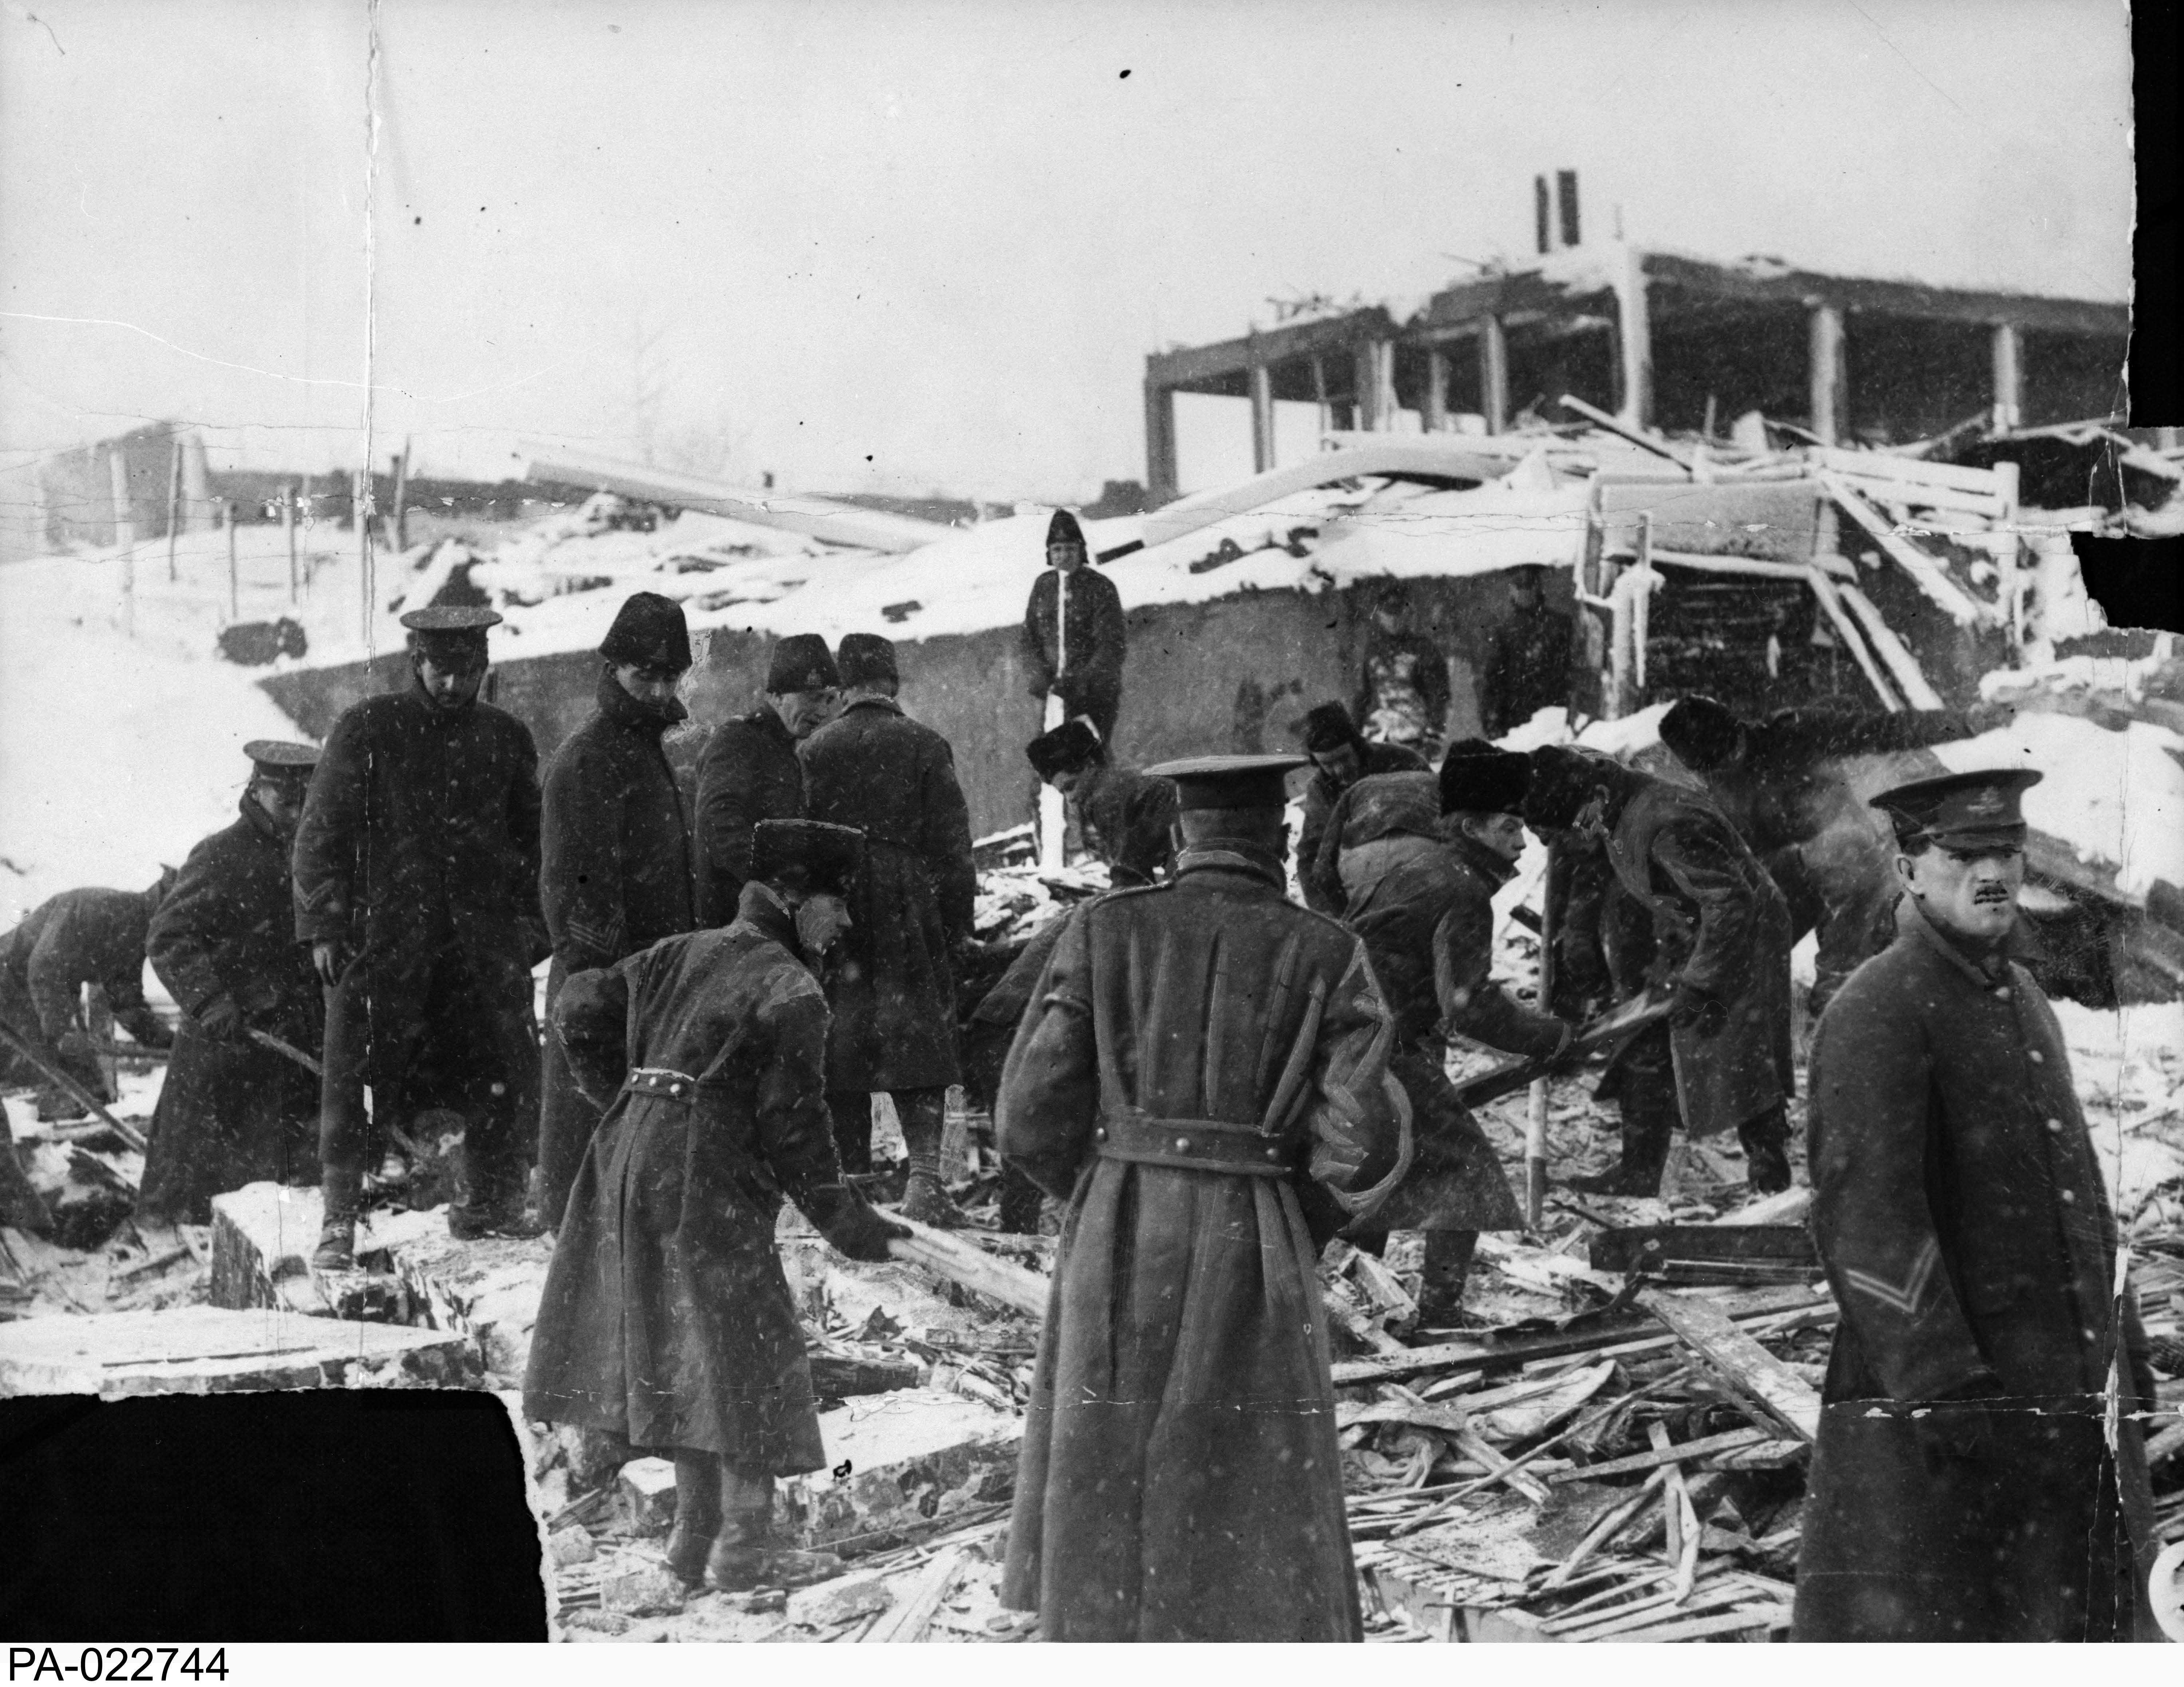 Black and white photograph. A group of soldiers digs through debris, searching for victims of the explosion. They wear long winter coats. The skeletal remains of a building  are visible on the hill beyond them.